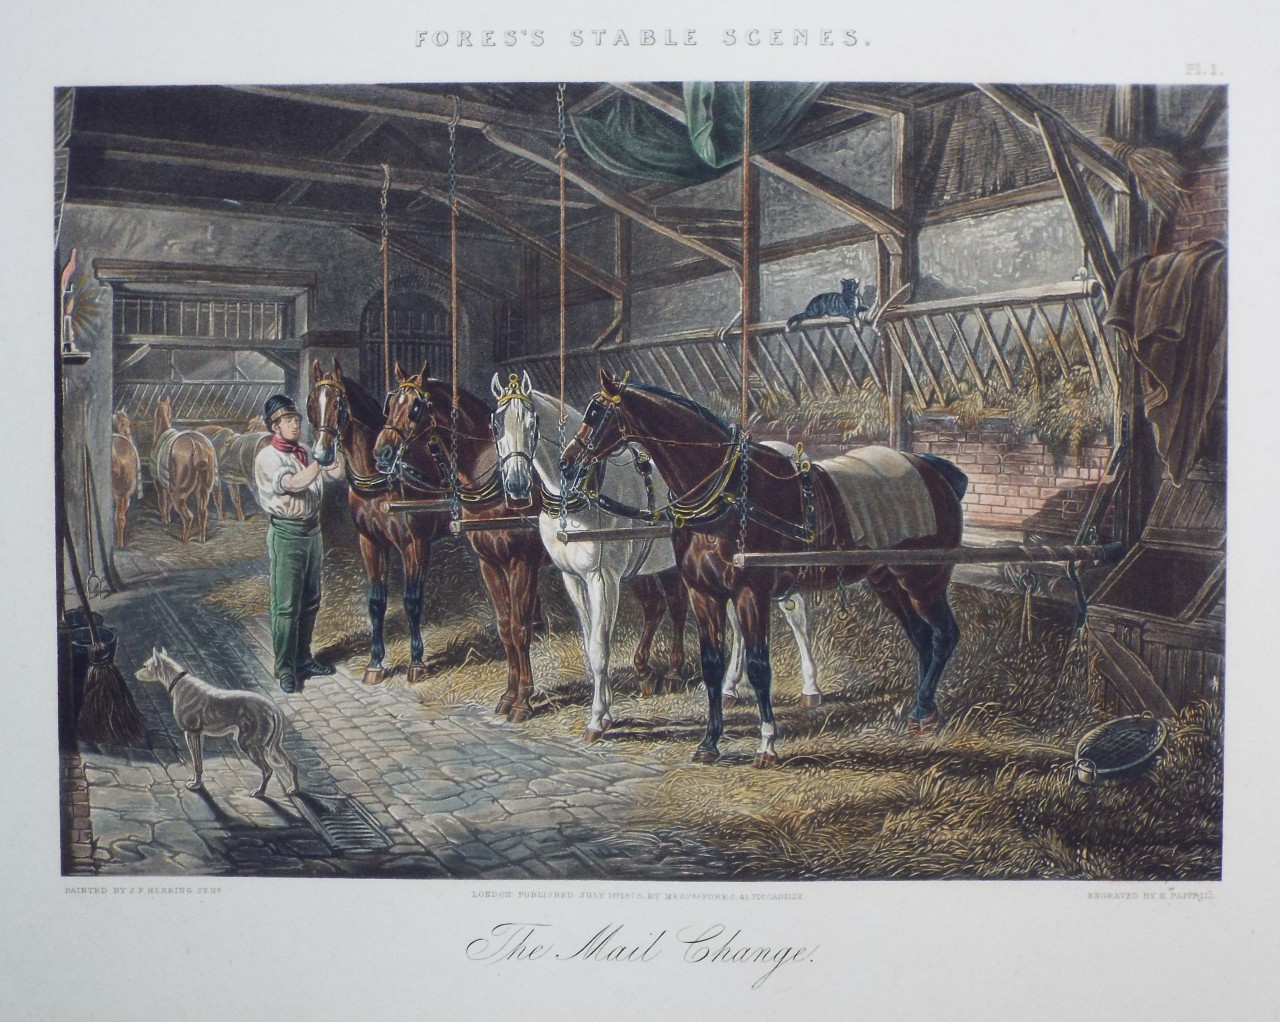 Aquatint - Fores's Stable Scenes. The Mail Change. - Papprill